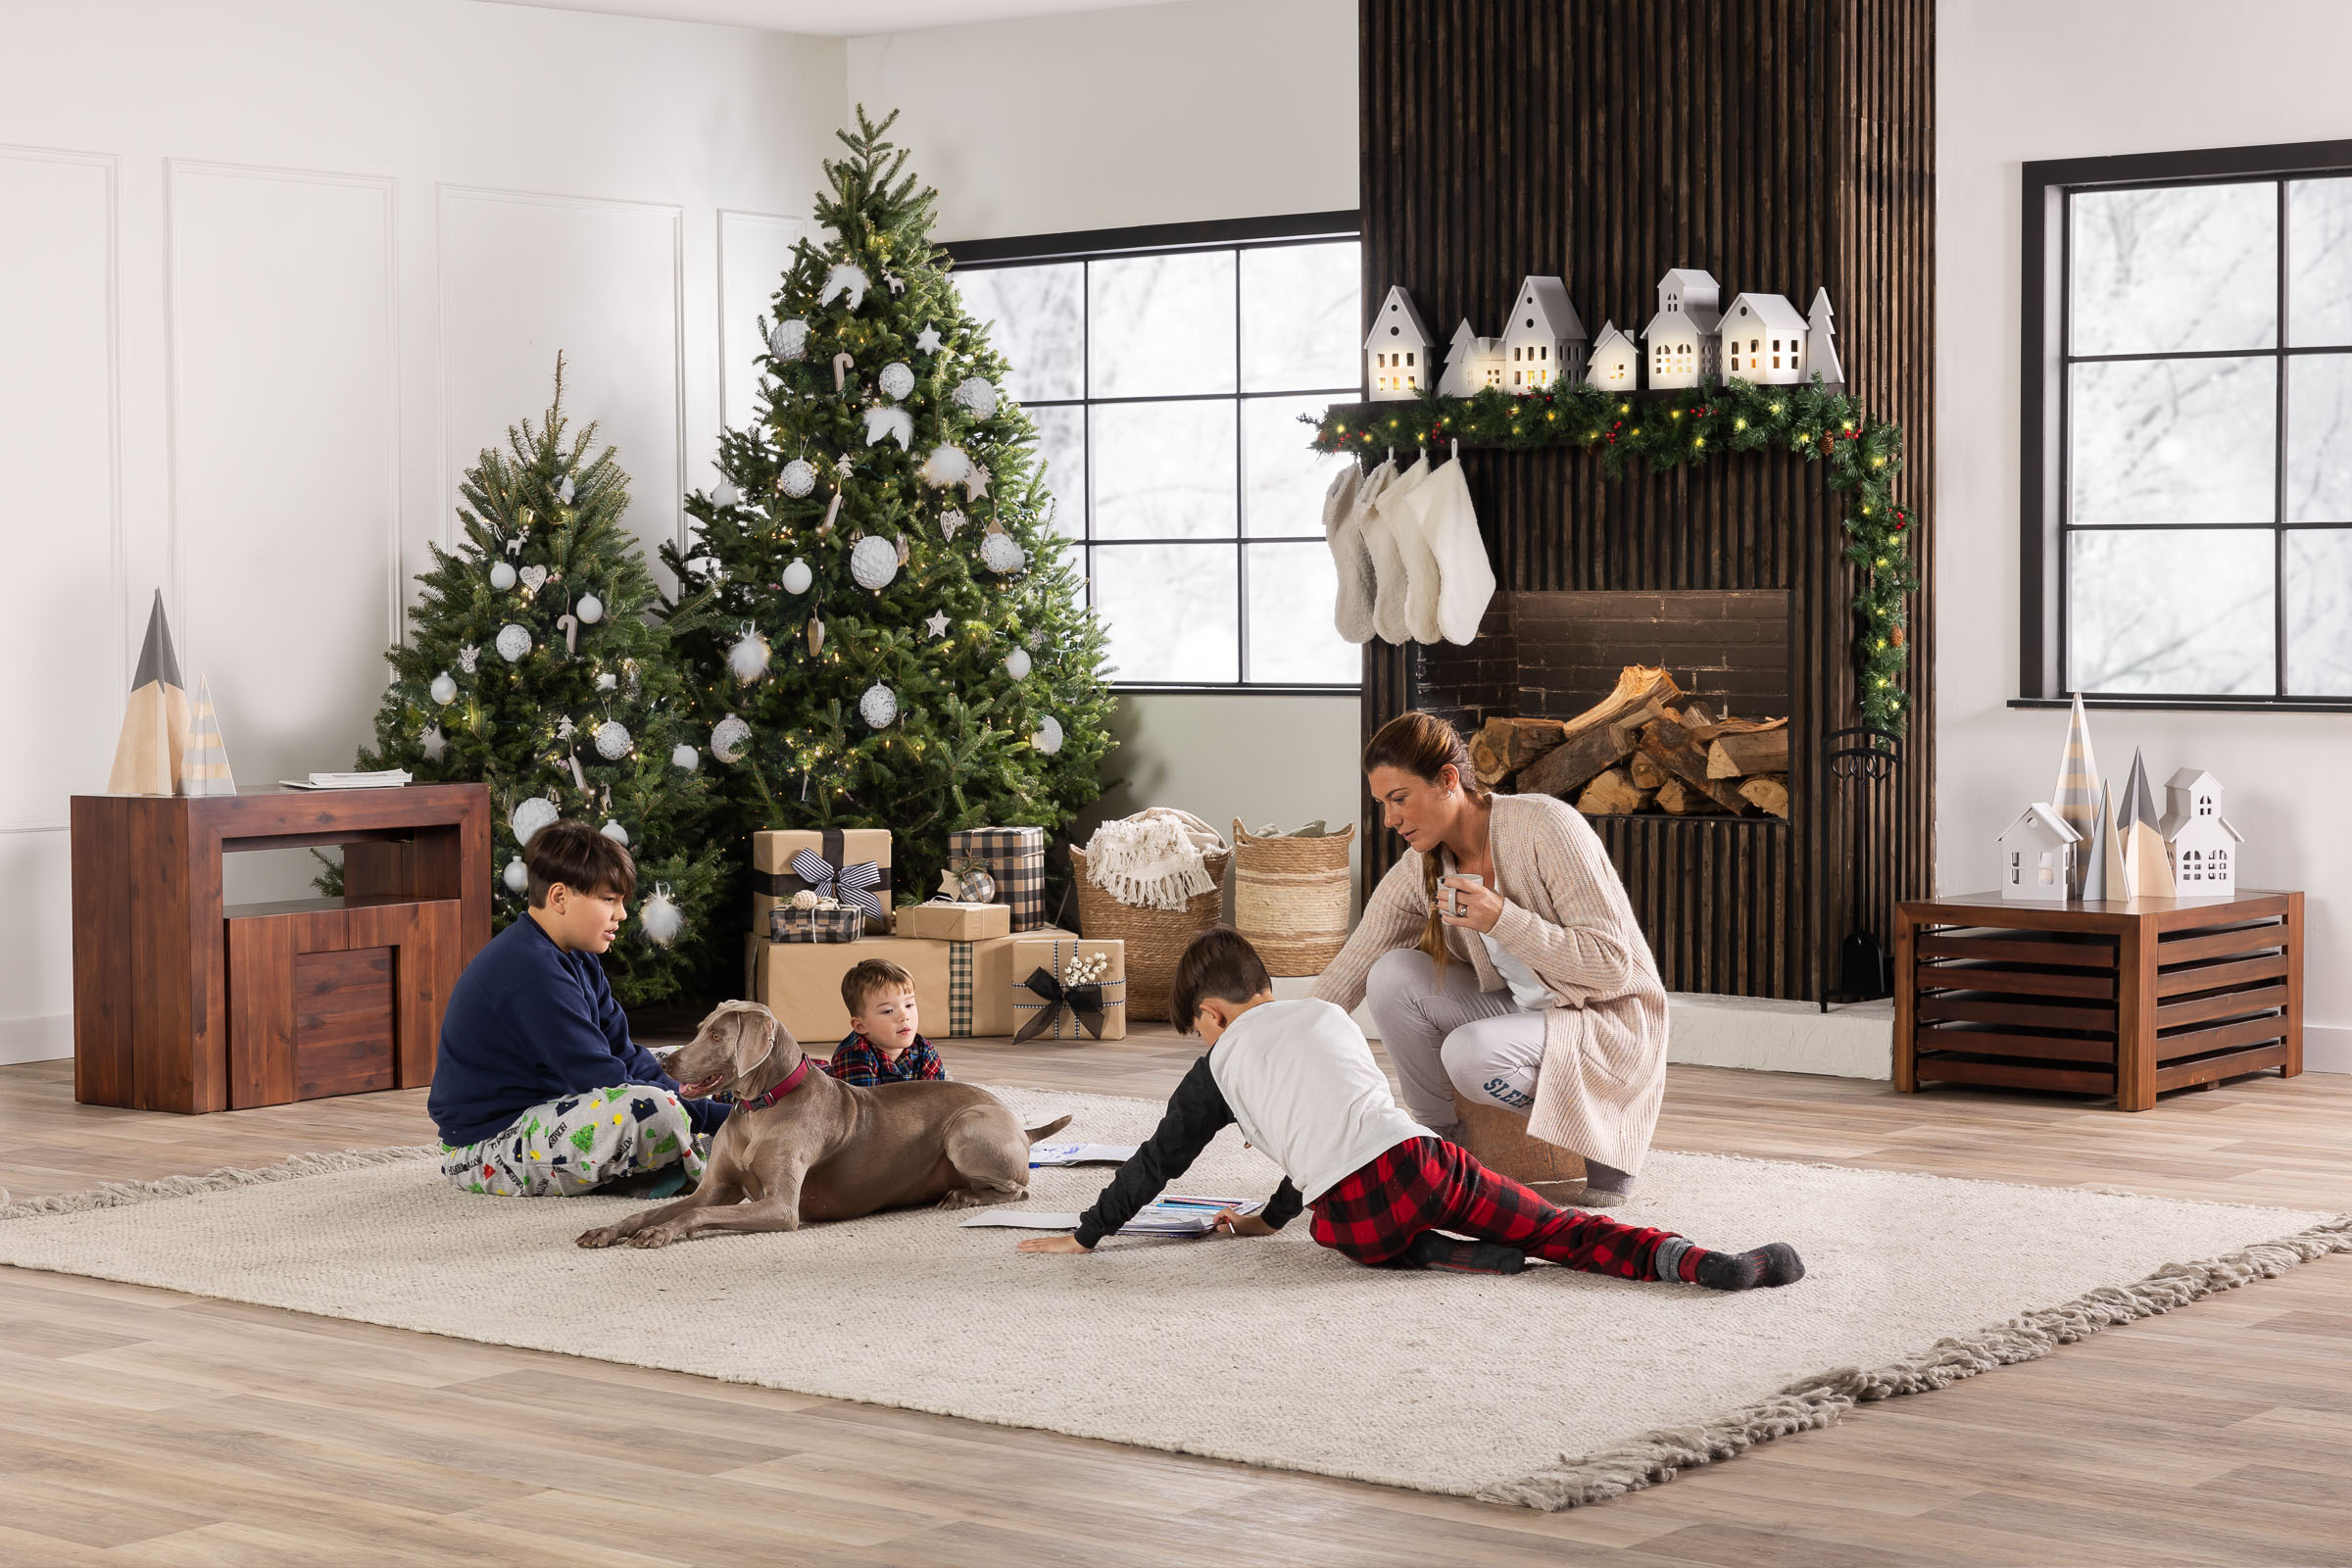 A mother and kids on Christmas days in the family living room